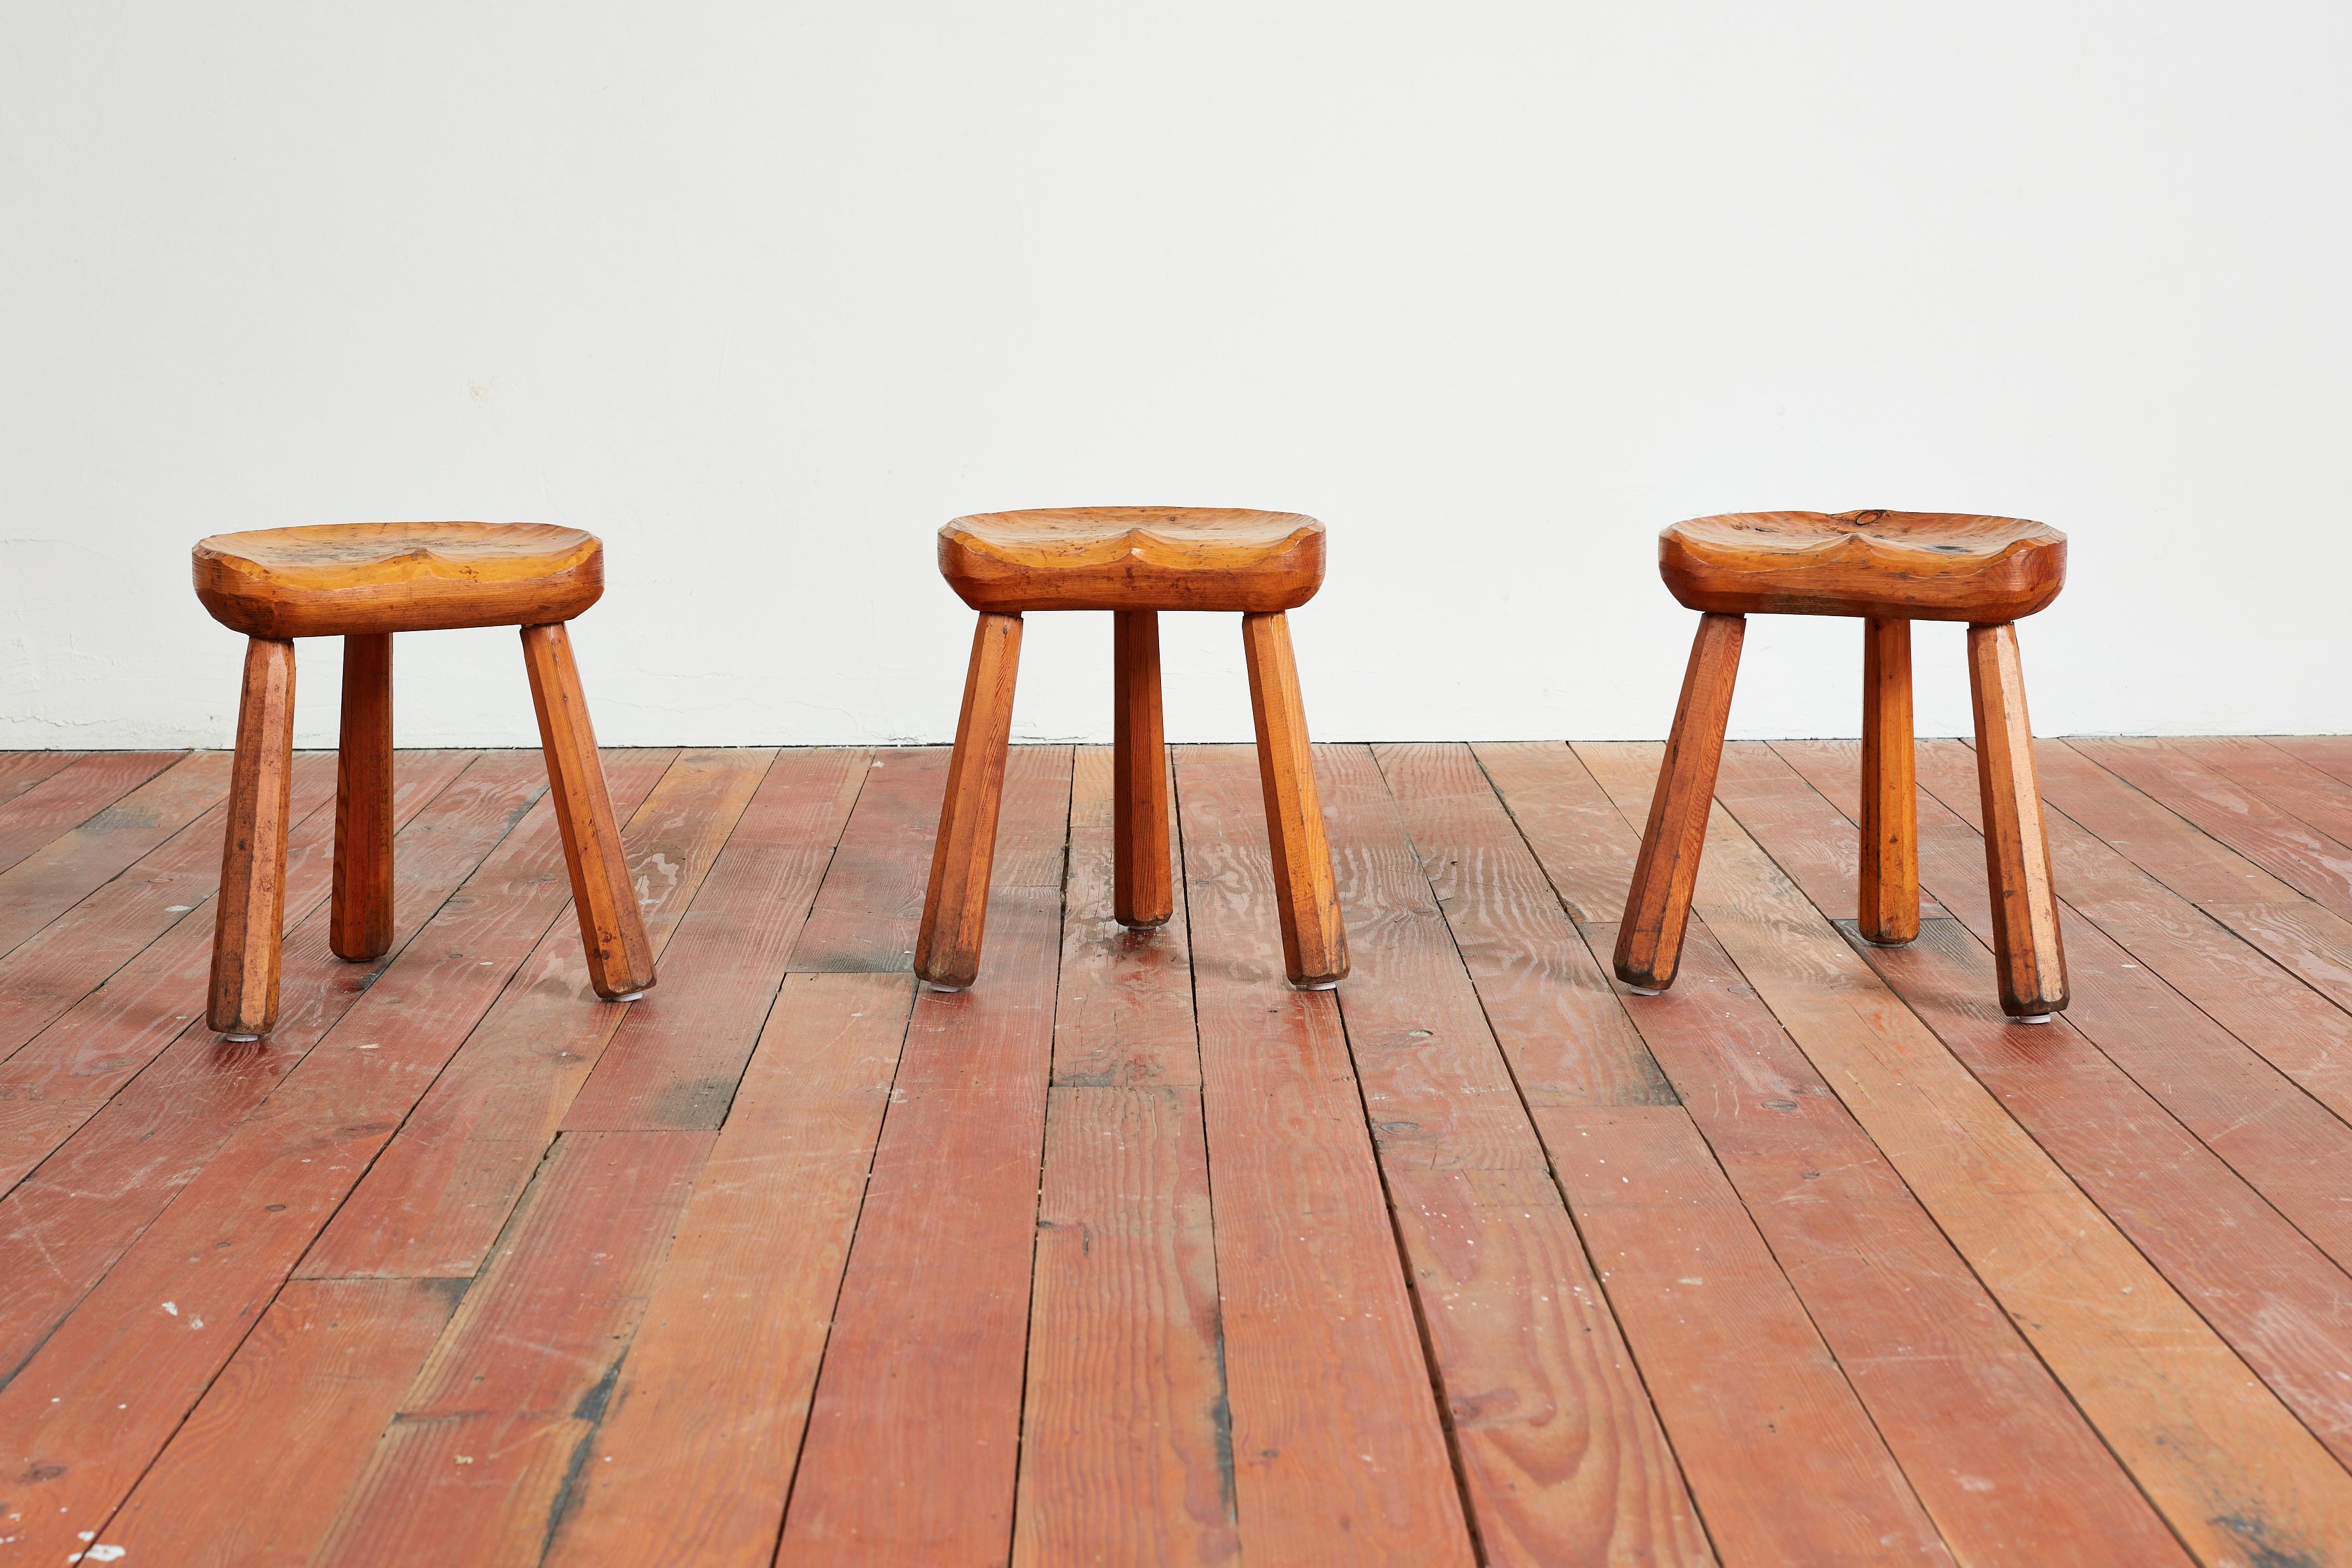 Brutalist carved solid wood carved tripod stools
France, circa 1940s
Carved concave seats sit on tripod legs
Priced individually.